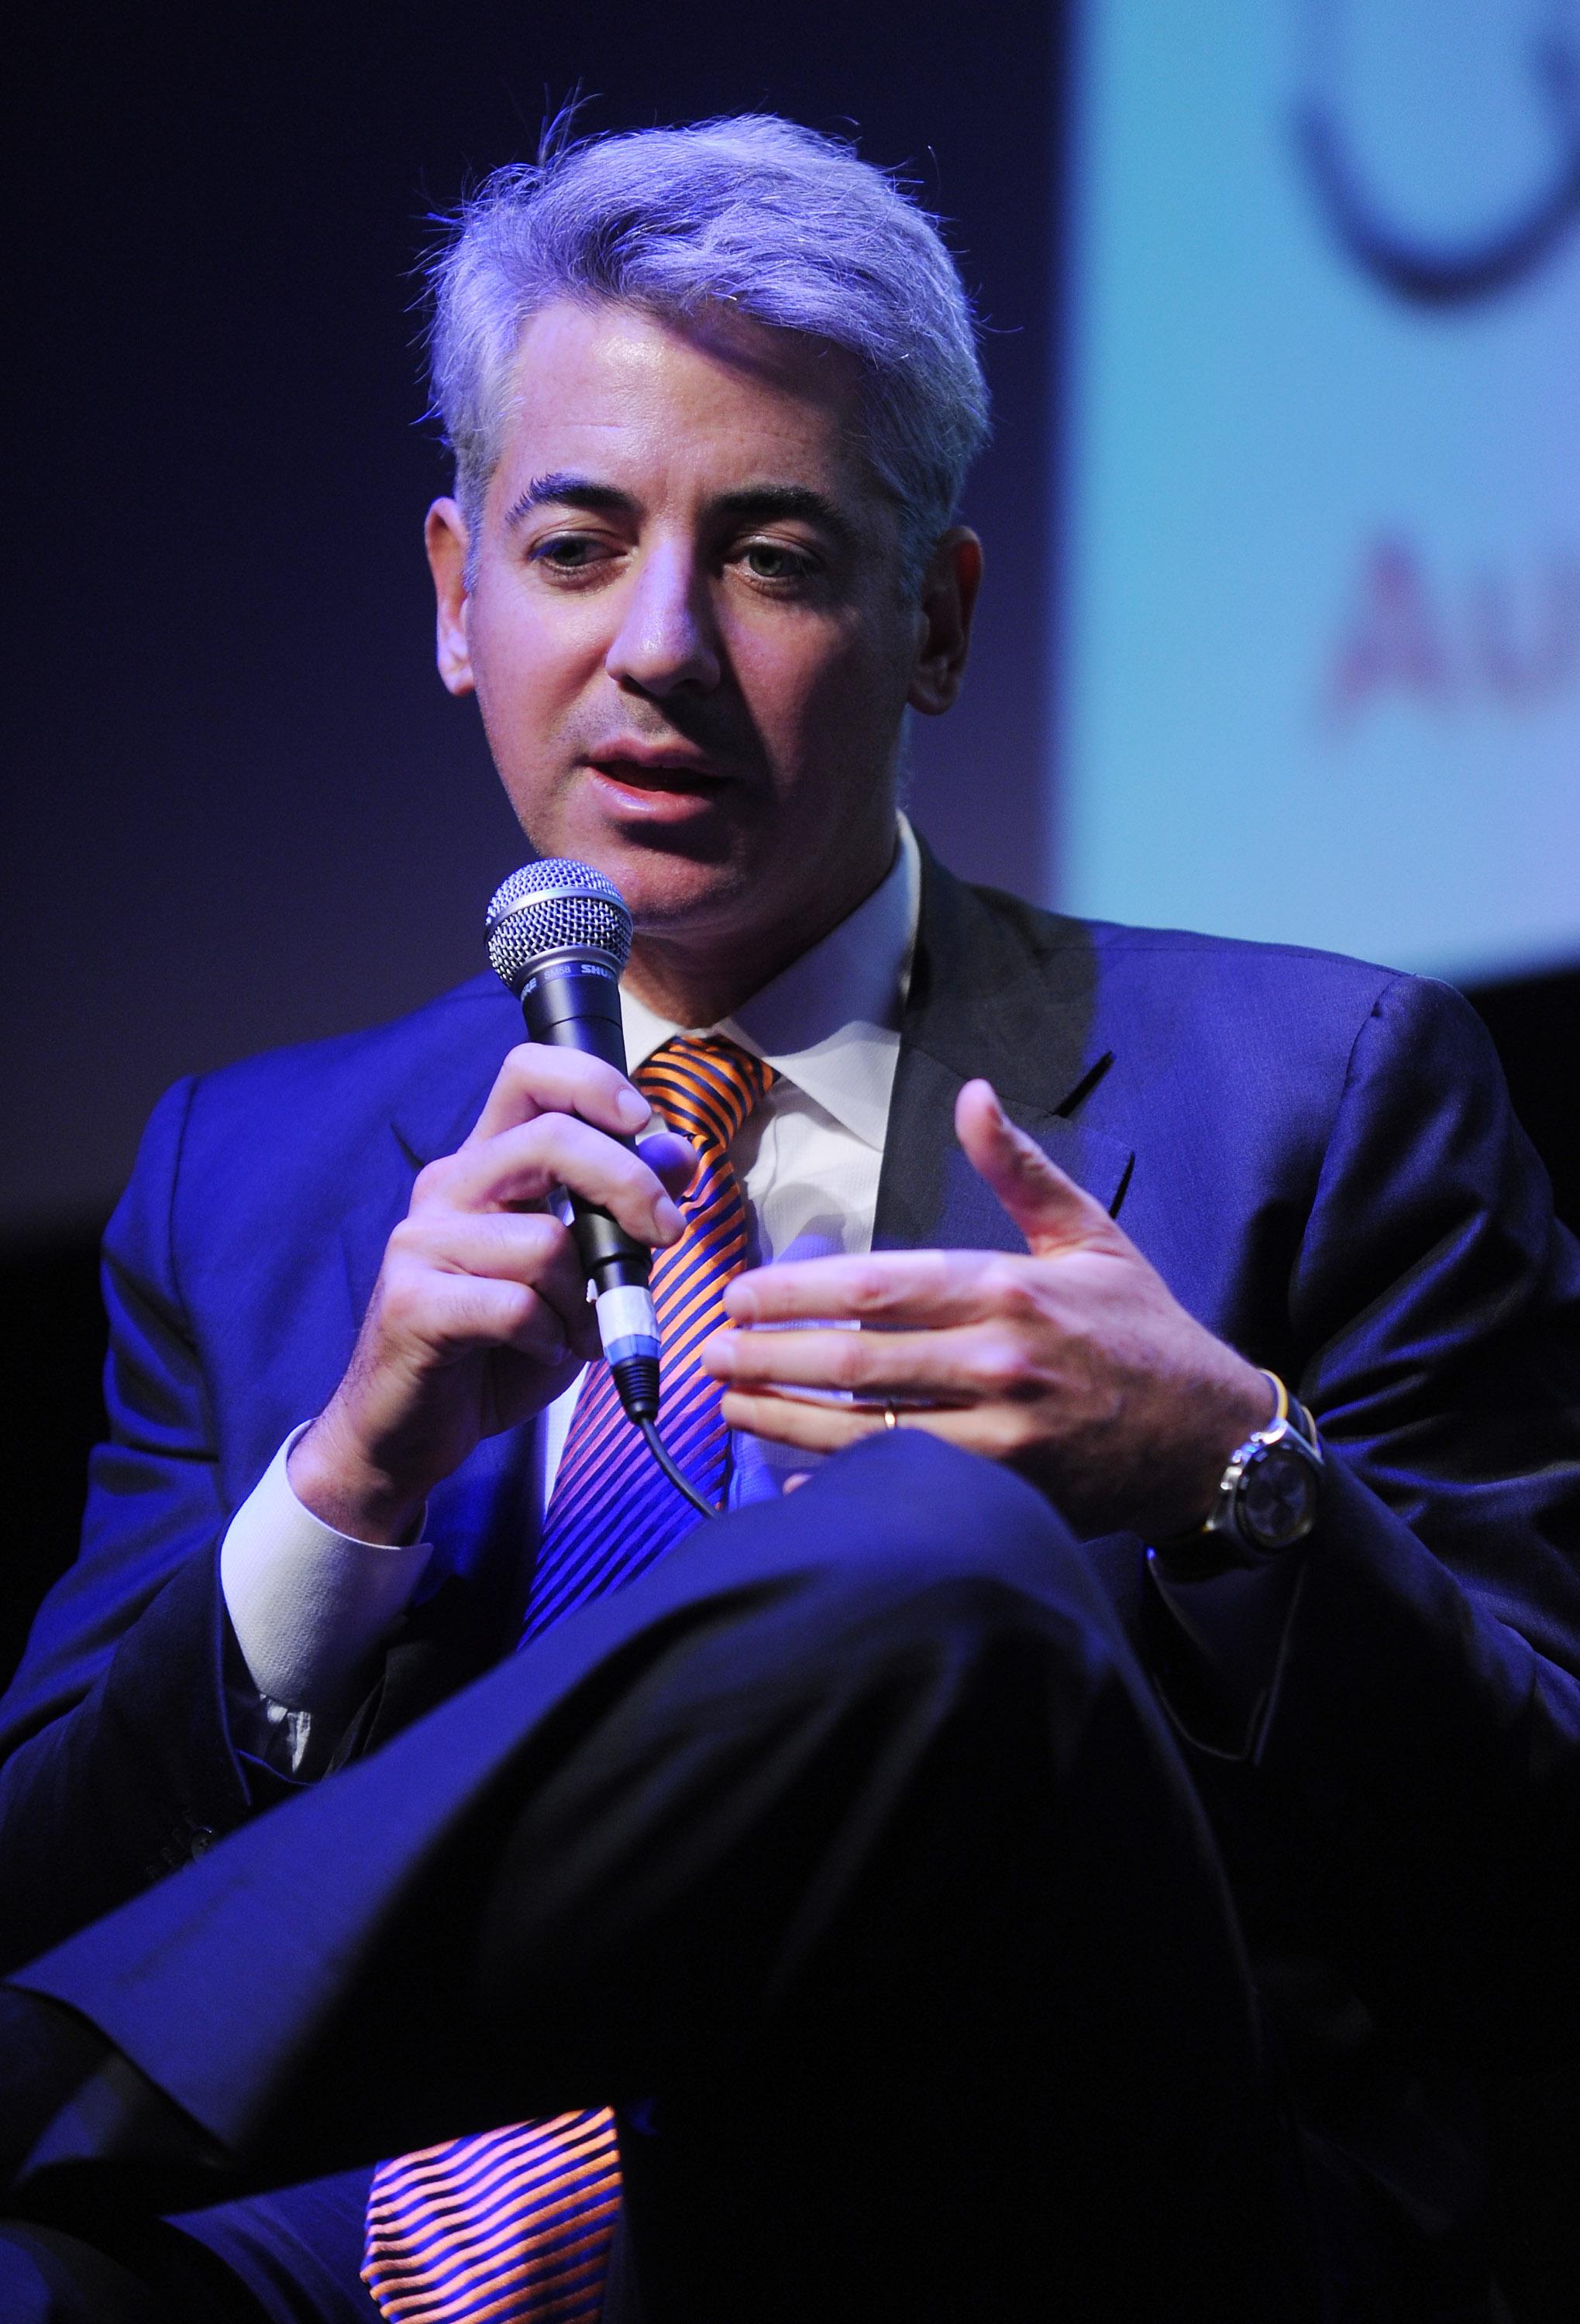 Pershing Square Capital Management CEO Bill Ackman speaks at the New York Film Festival.